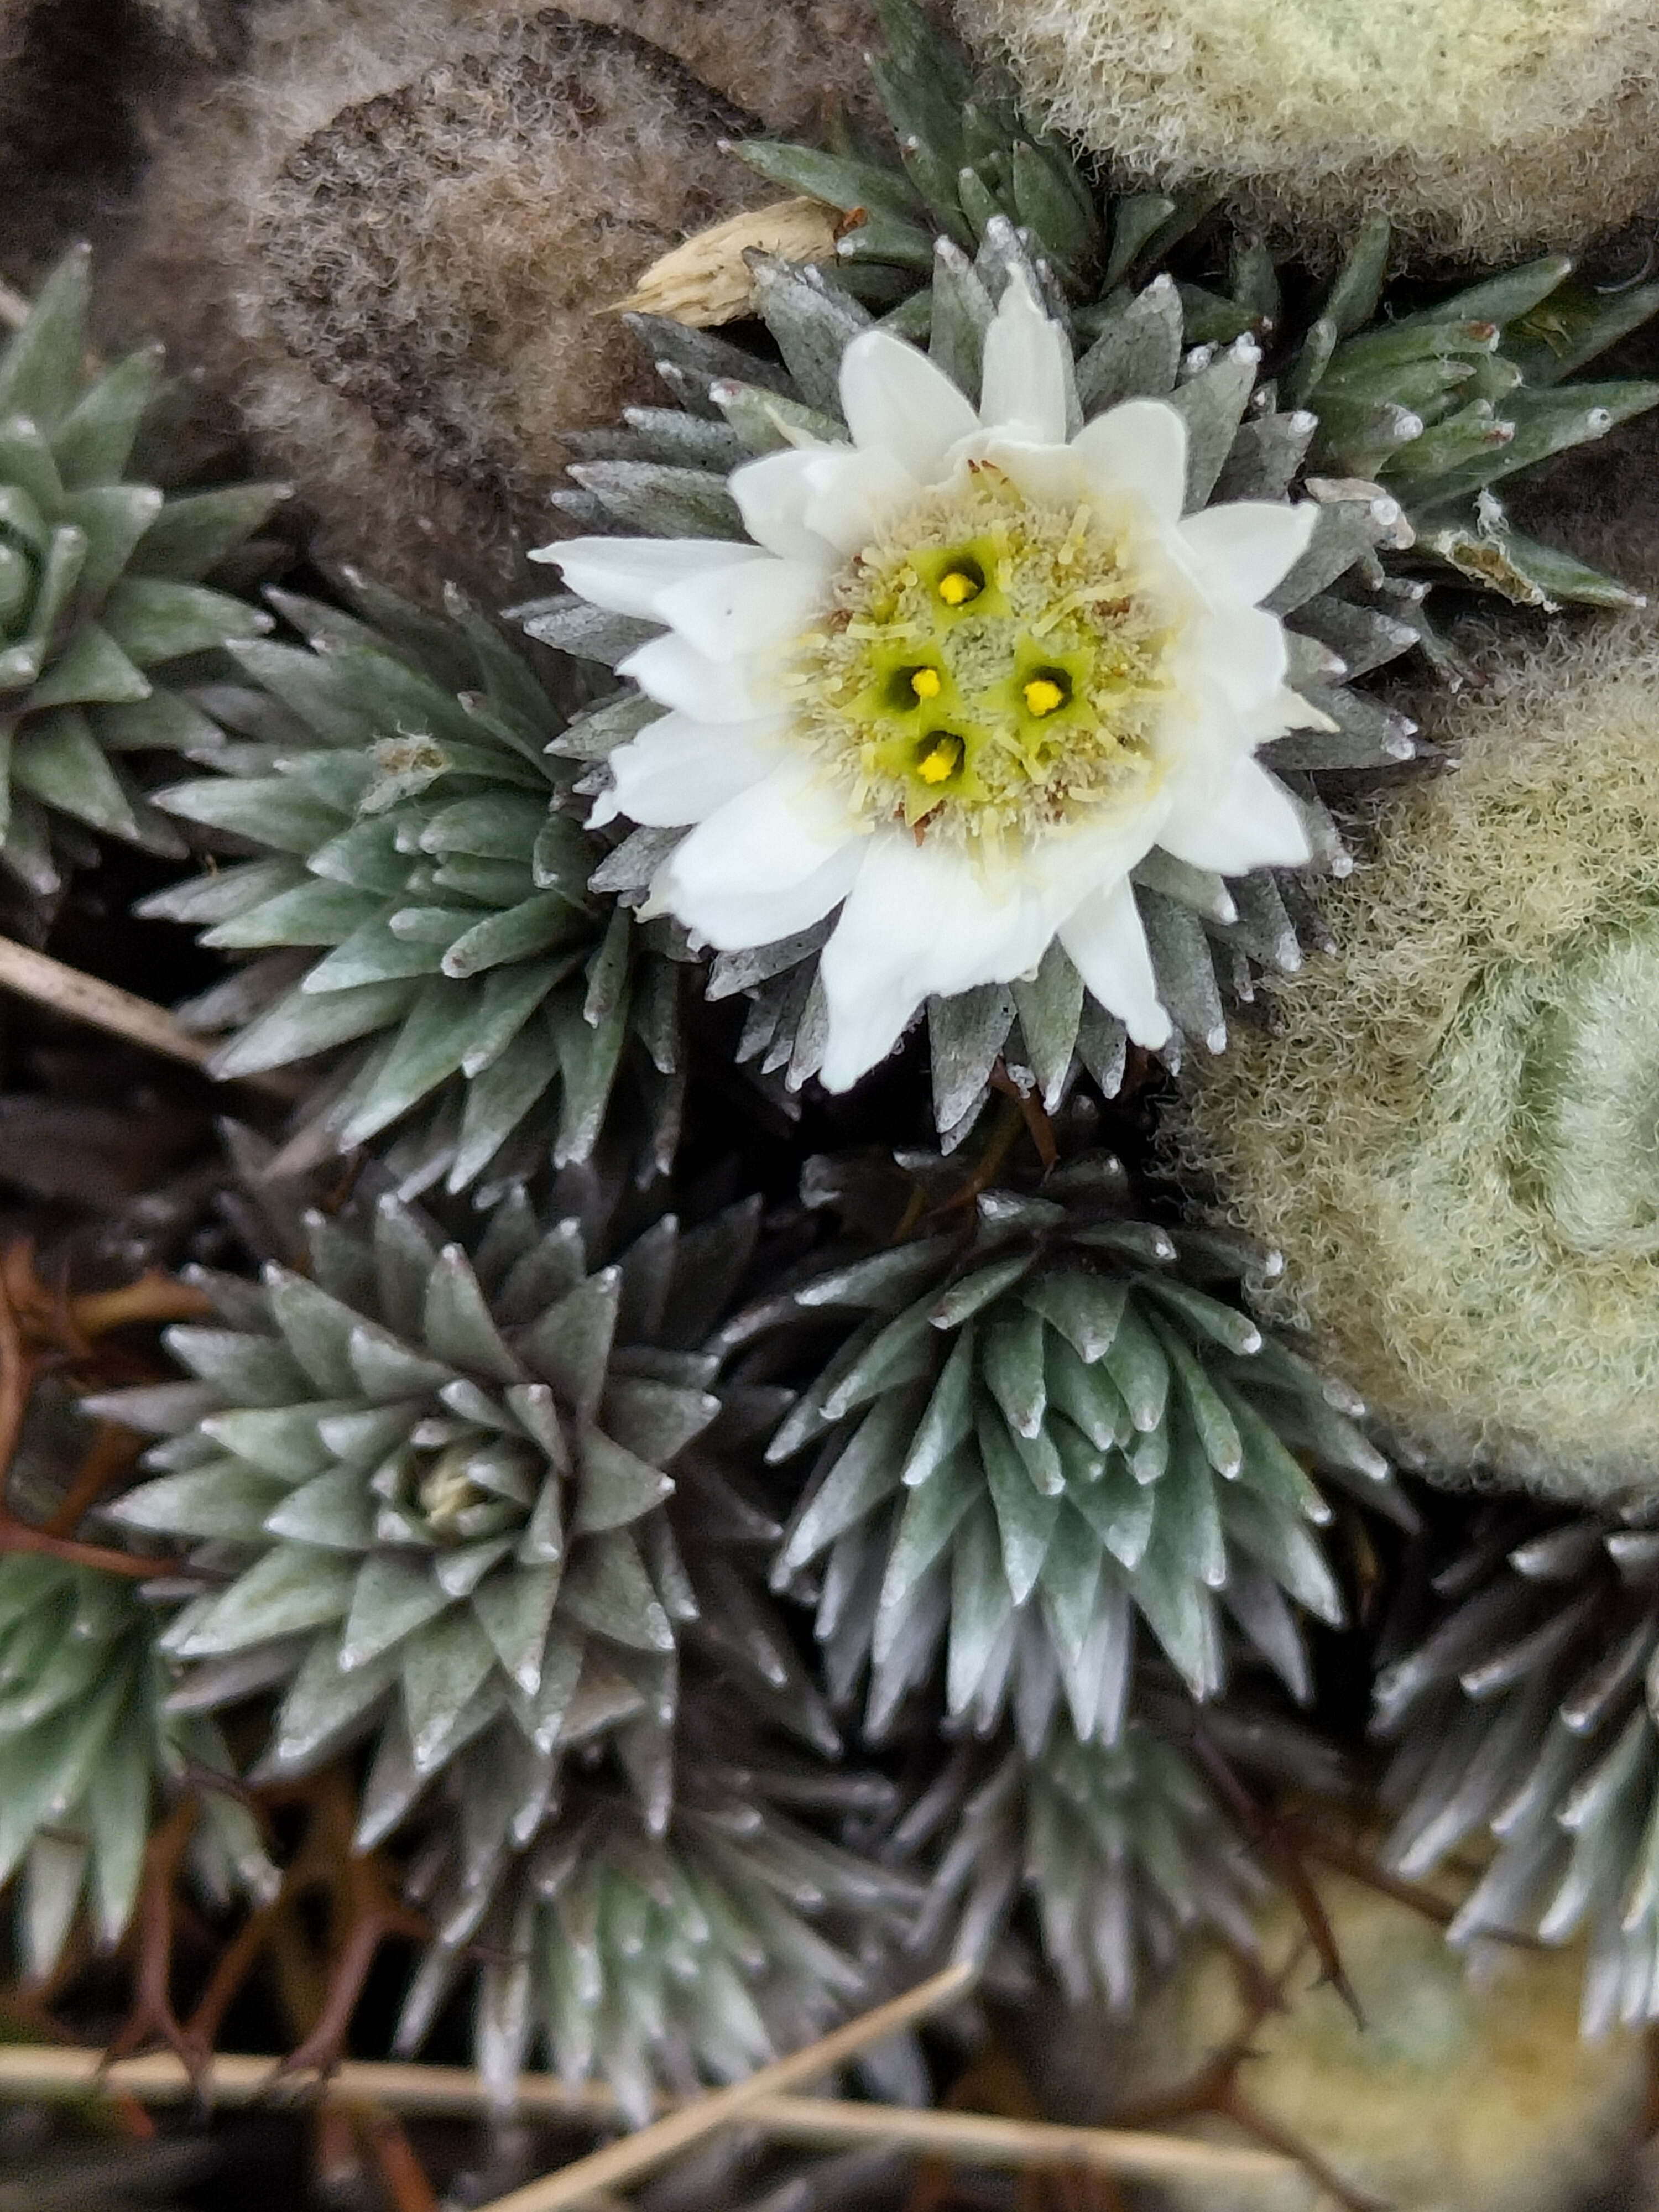 A white and yellow flower sitting by small spiky succulents.